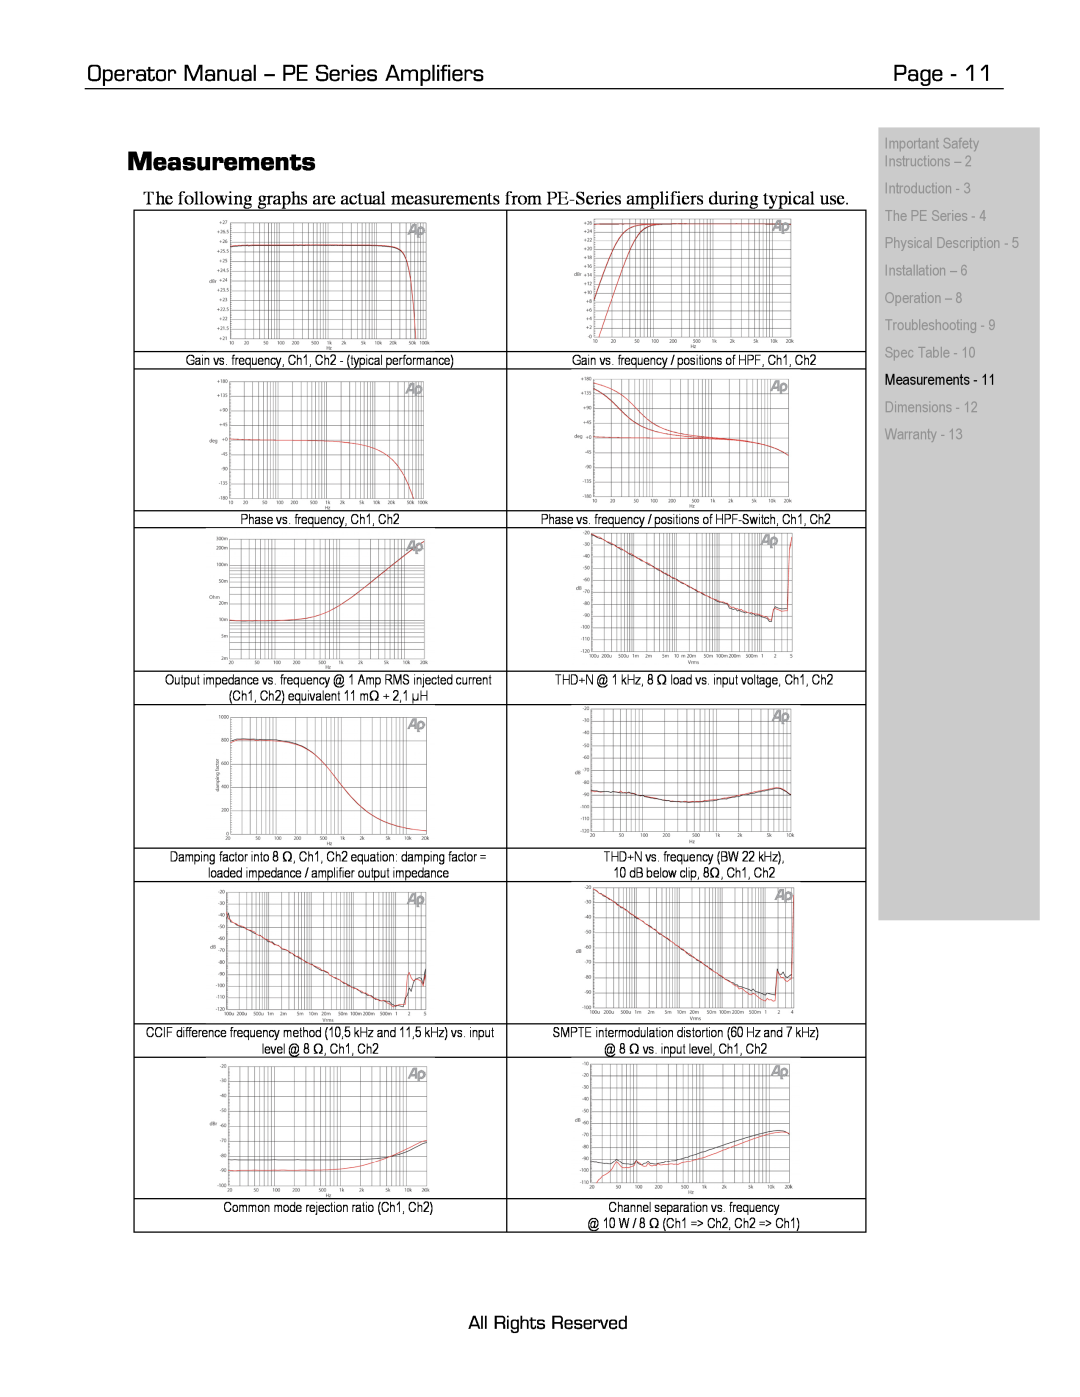 Ashly manual Measurements, Operator Manual - PE Series Amplifiers, Page, All Rights Reserved, Spec Table 